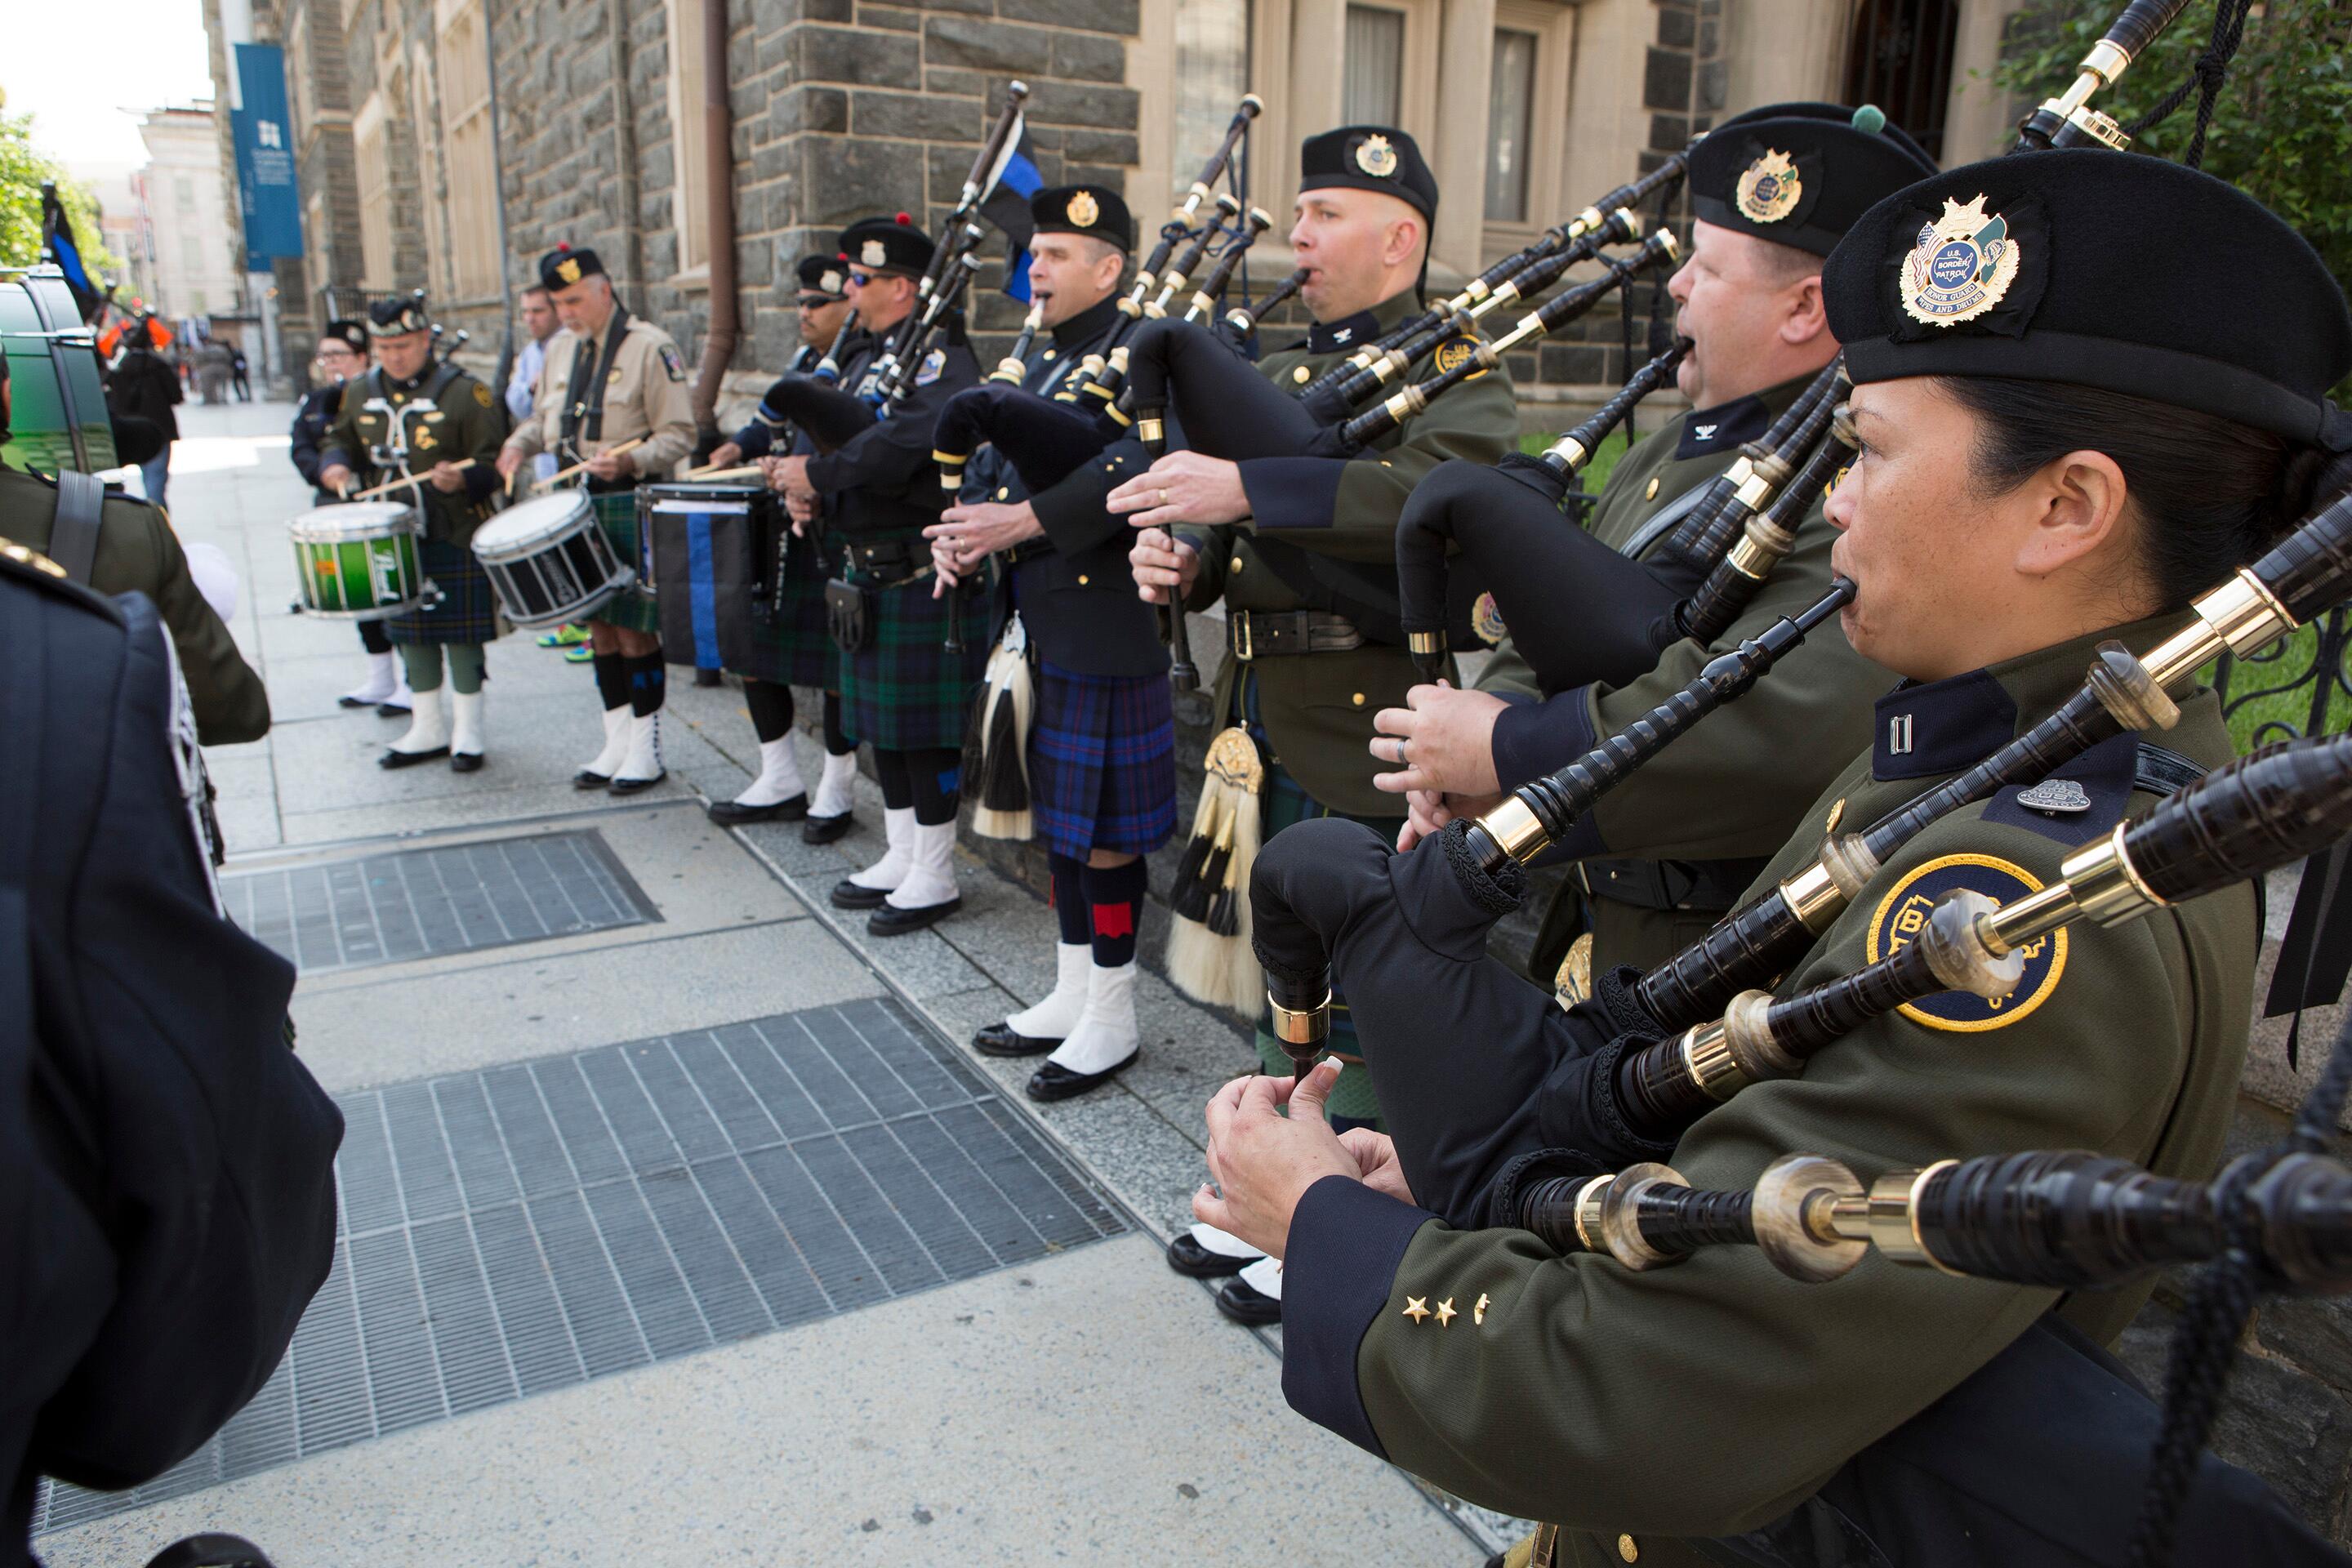 U.S. Customs and Border Protection Pipes and Drum Honor Guard members perform outside ceremony to honor fallen police and fire personnel, part of the 20th Annual Blue Mass in Washington, D.C. <em>(photo by James Tourtellotte)</em>